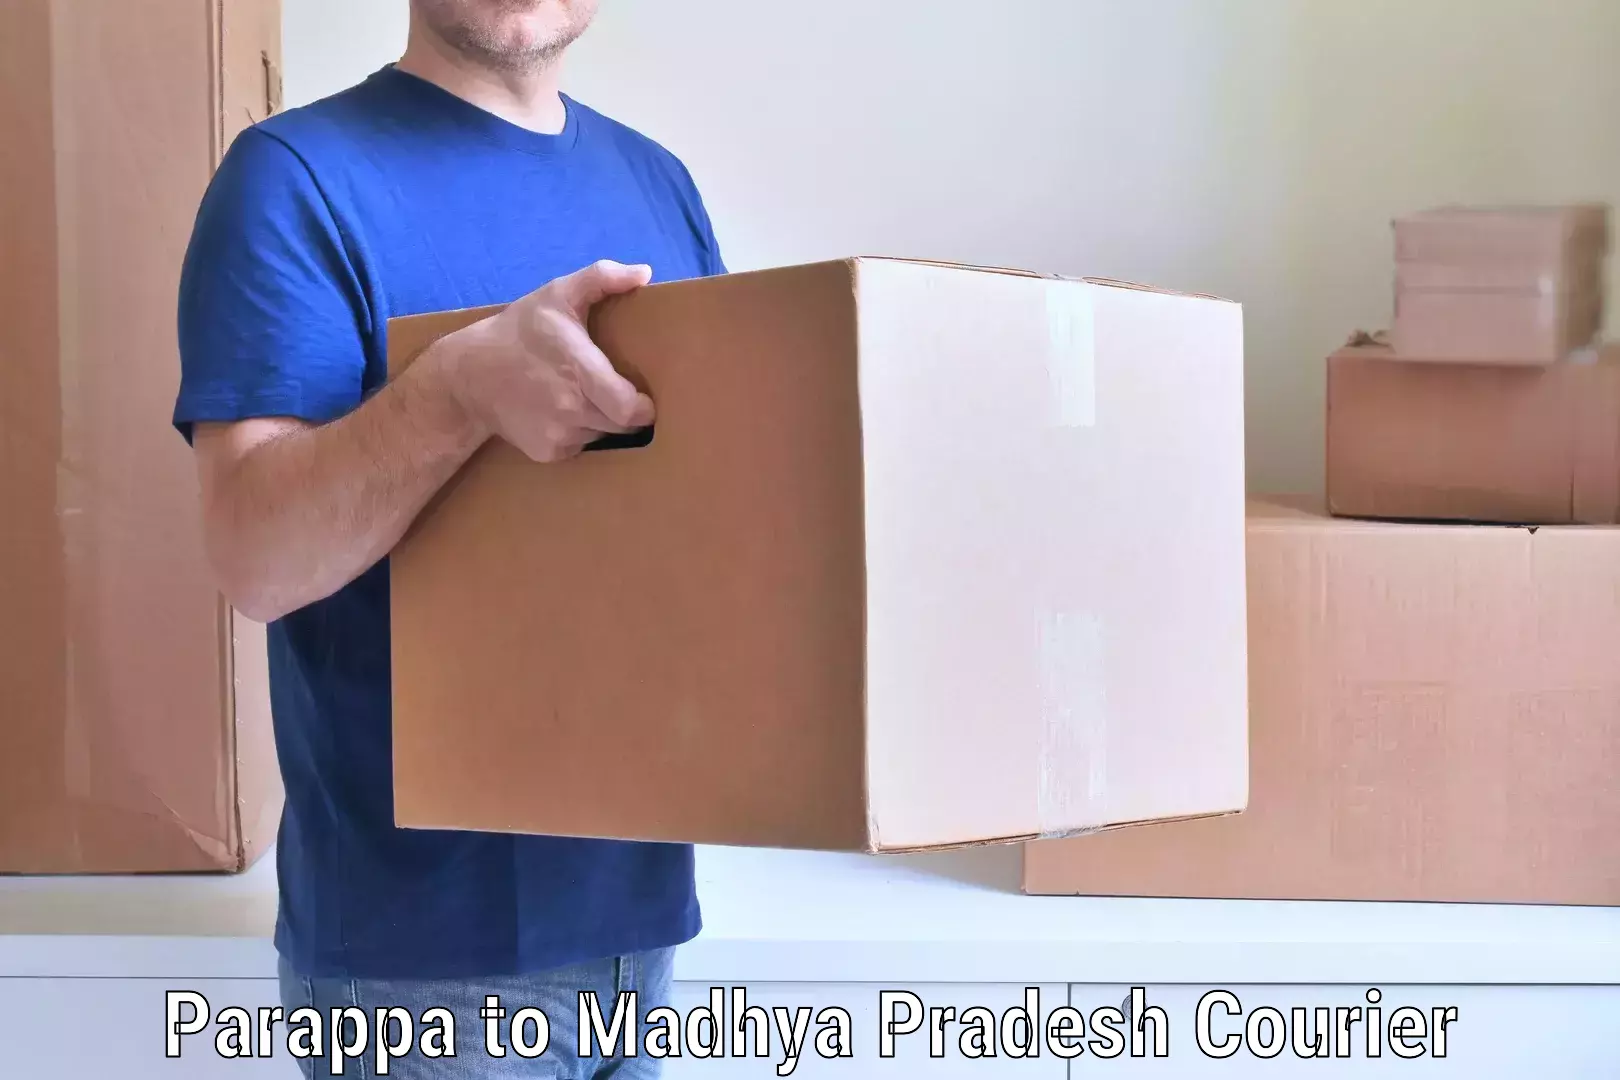 Full-service movers Parappa to Chanderi